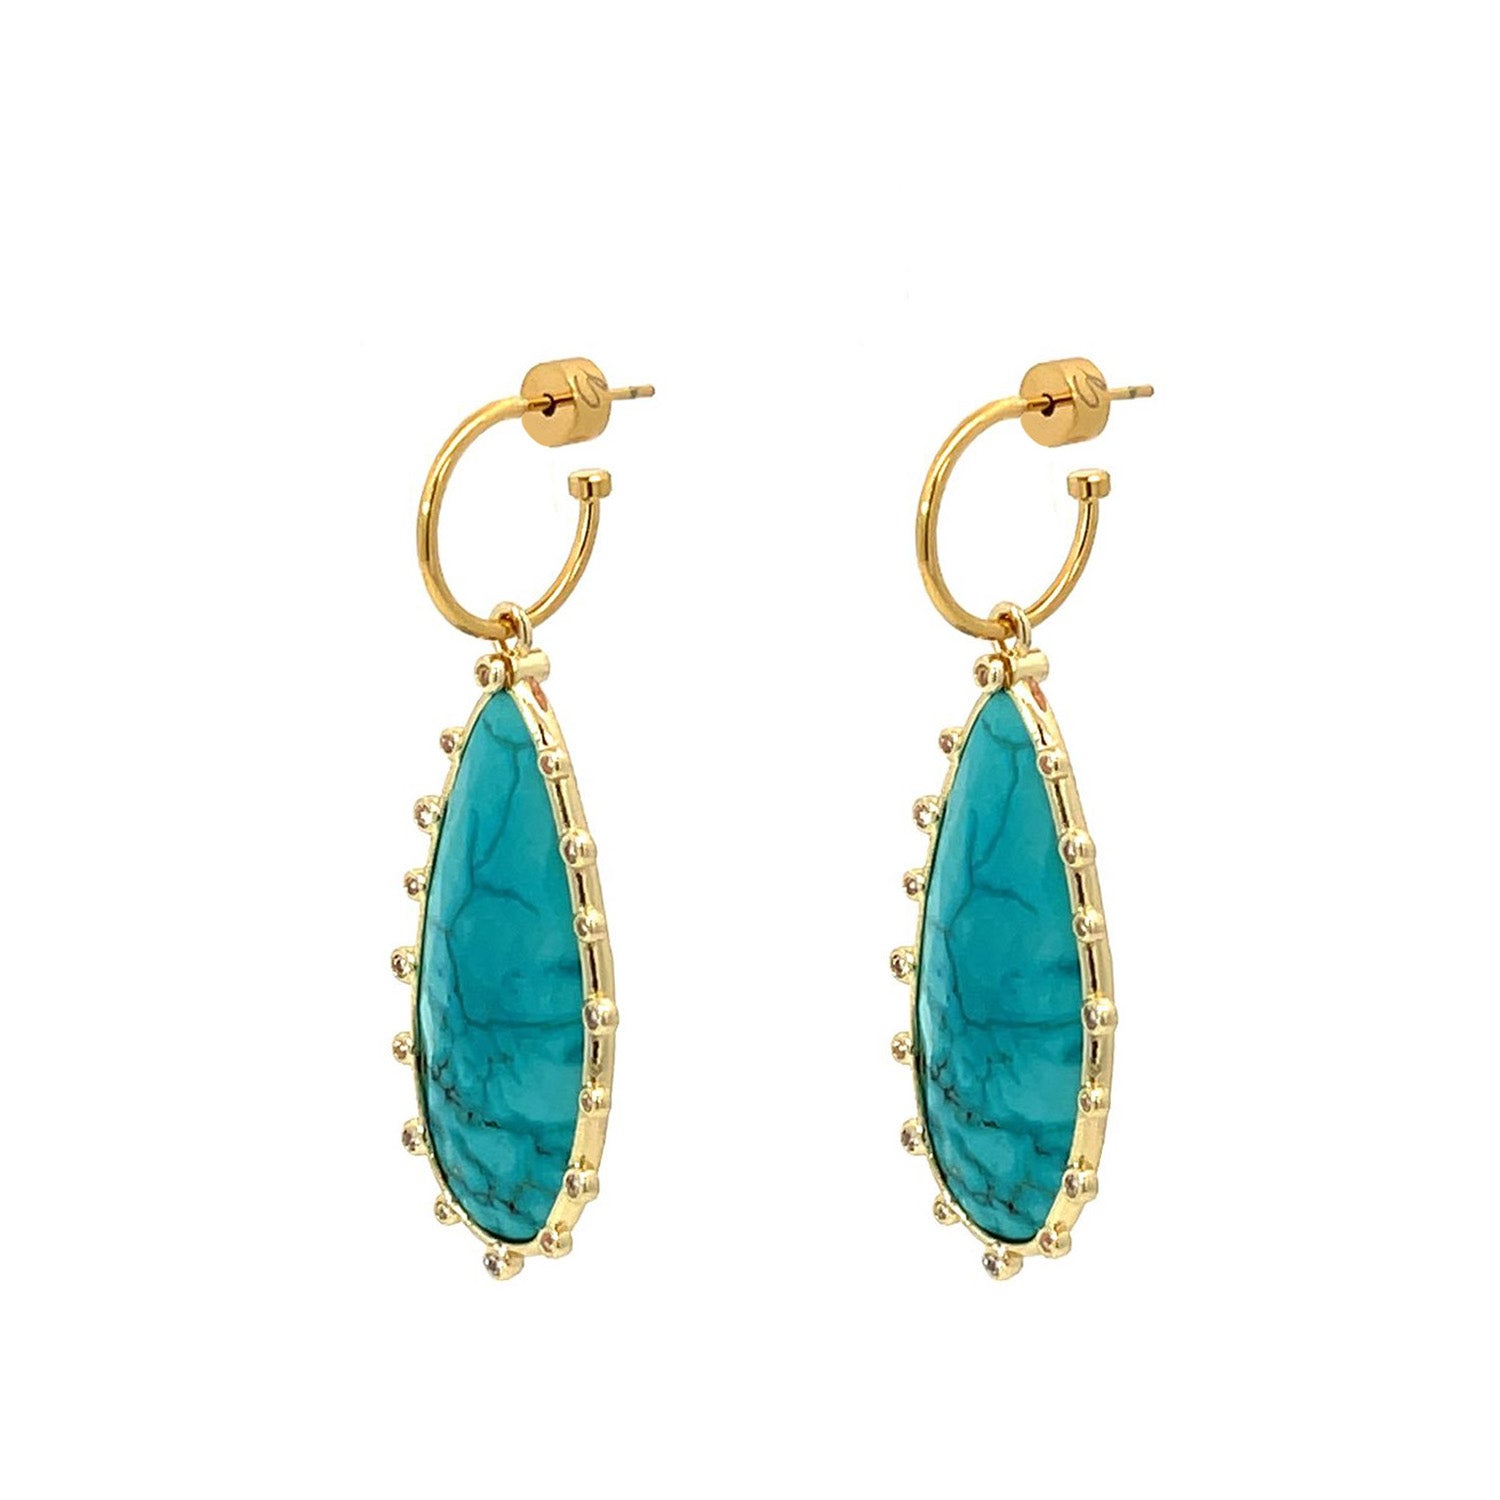 Discover Spiked Turquoise Earrings Online